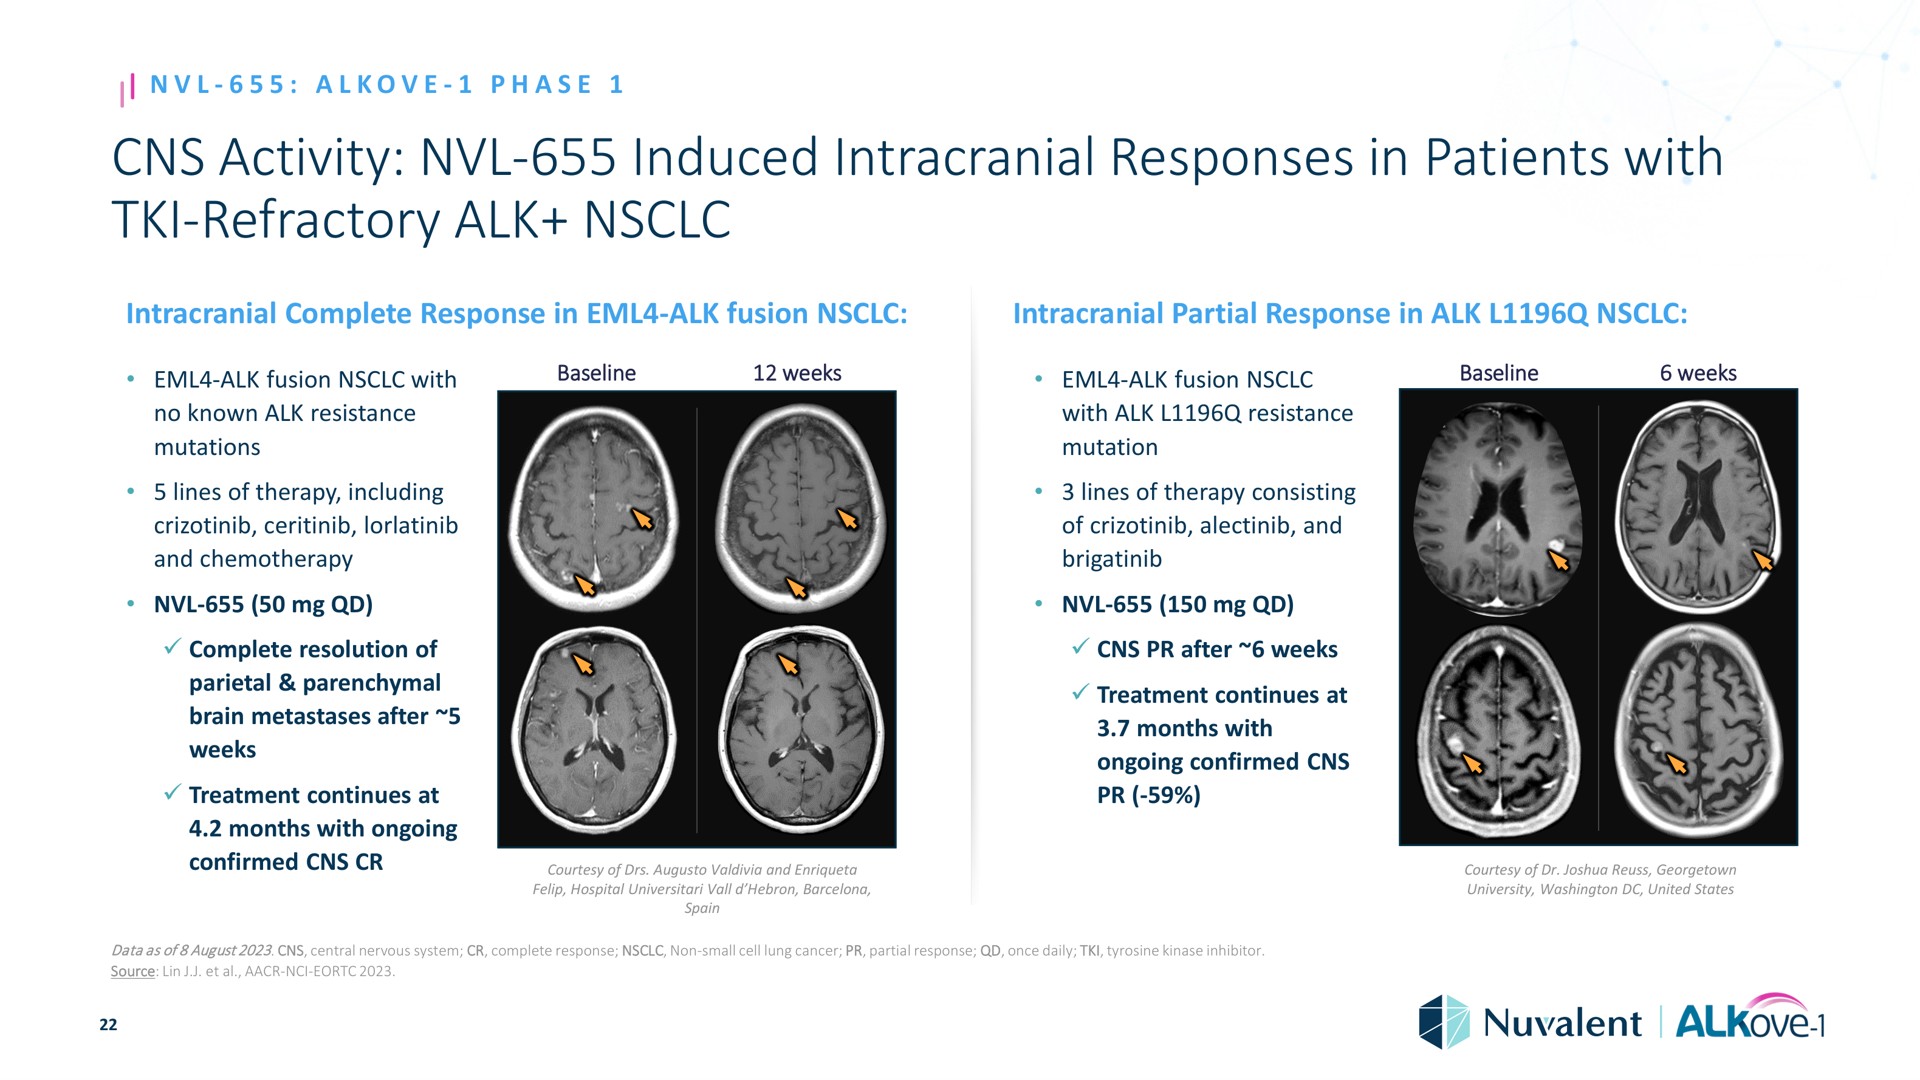 activity induced intracranial responses in patients with refractory alk phase refractory complete response alk fusion alk fusion no known resistance mutations lines of therapy including and chemotherapy complete resolution of parietal parenchymal brain metastases after weeks treatment continues at months ongoing mutation weeks resistance alk fusion partial response ongoing confirmed lines of therapy consisting treatment continues at after weeks of and months weeks confirmed courtesy of and hospital vall barcelona courtesy of university united states data as of august central nervous system complete response non small source lin cell lung cancer partial response once daily tyrosine kinase inhibitor | Nuvalent